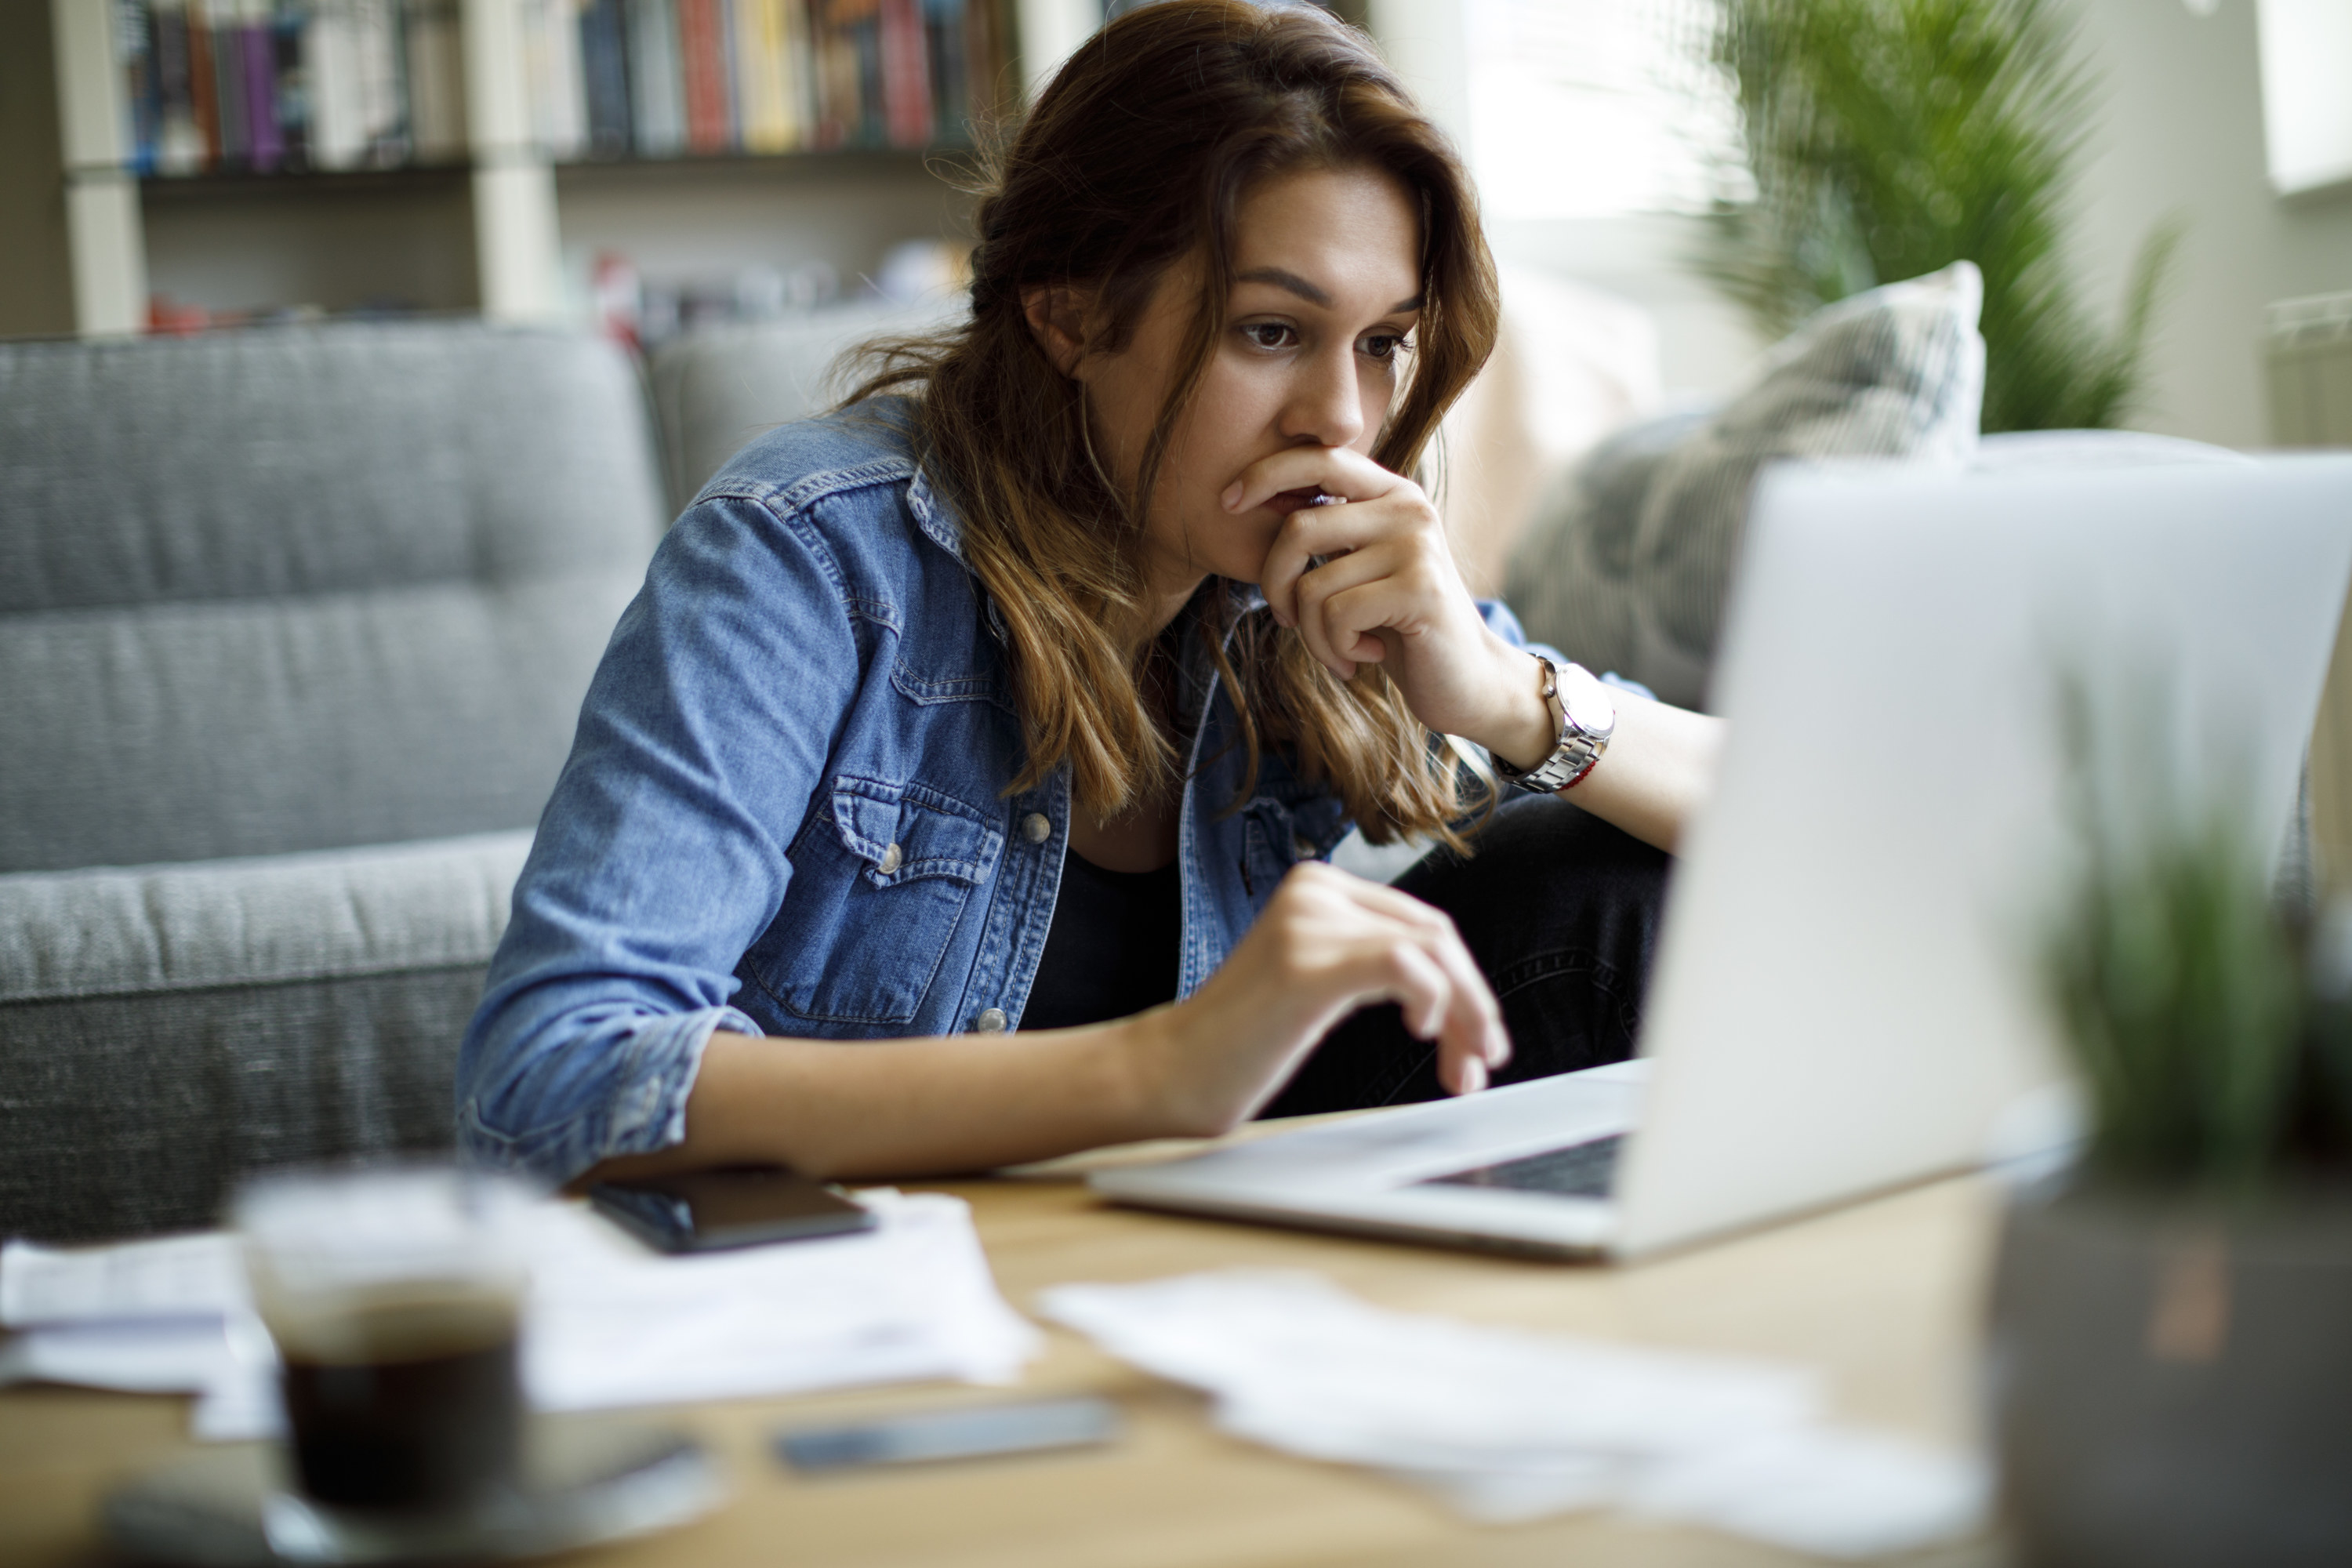 A stressed-looking young woman staring at a laptop